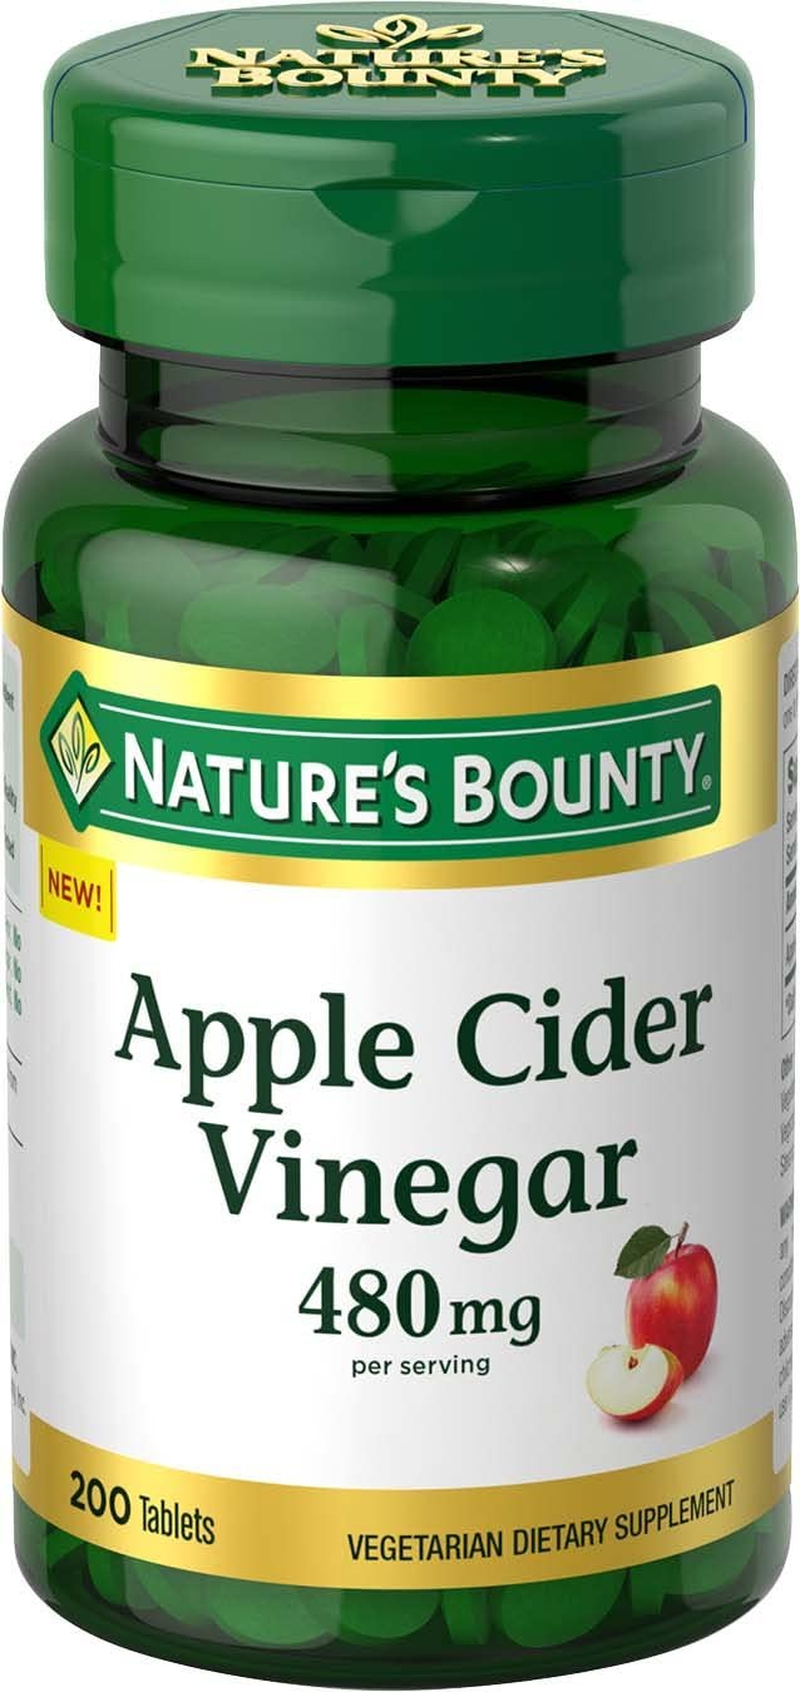 Apple Cider Vinegar Dietary Supplement, Supports Energy Levels and Metabolism, Plant Based, 480Mg, 200 Tablets